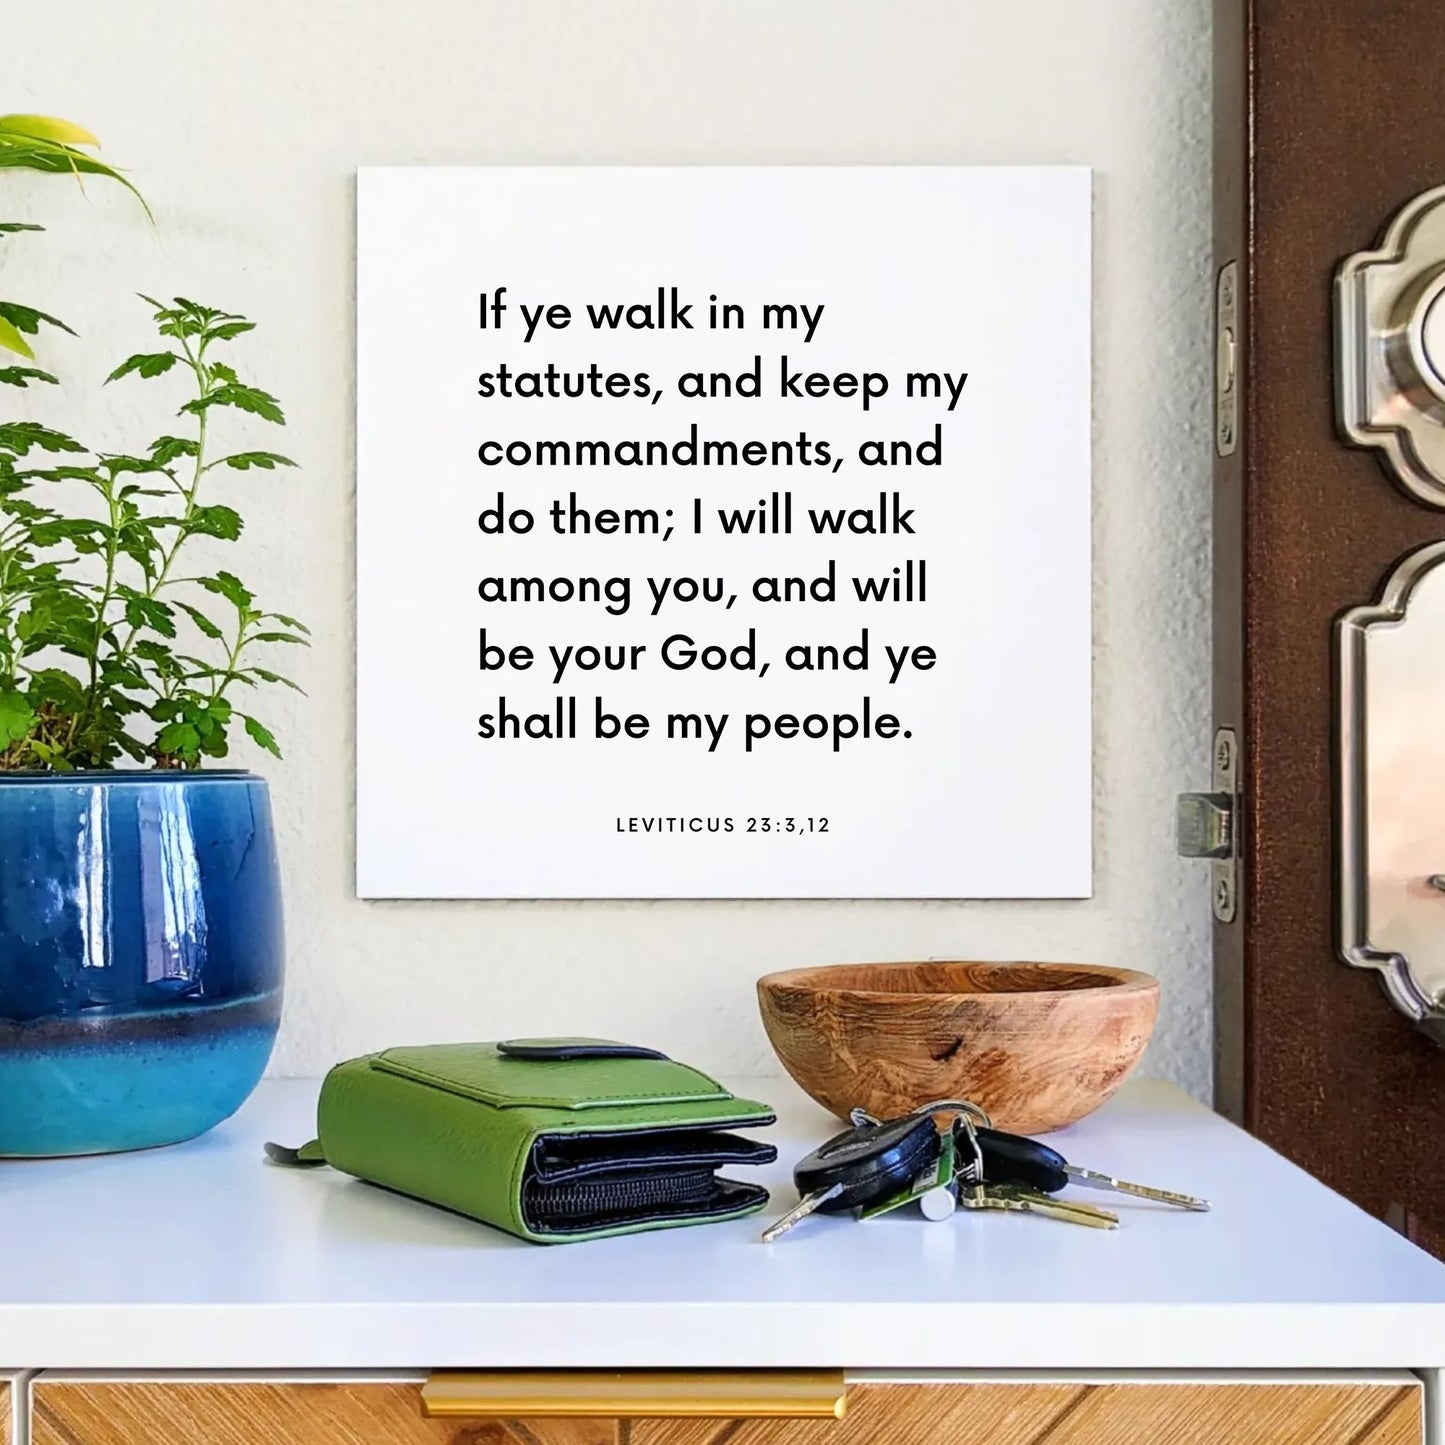 Entryway mouting of the scripture tile for Leviticus 23:3,12 - "I will walk among you, and will be your God"